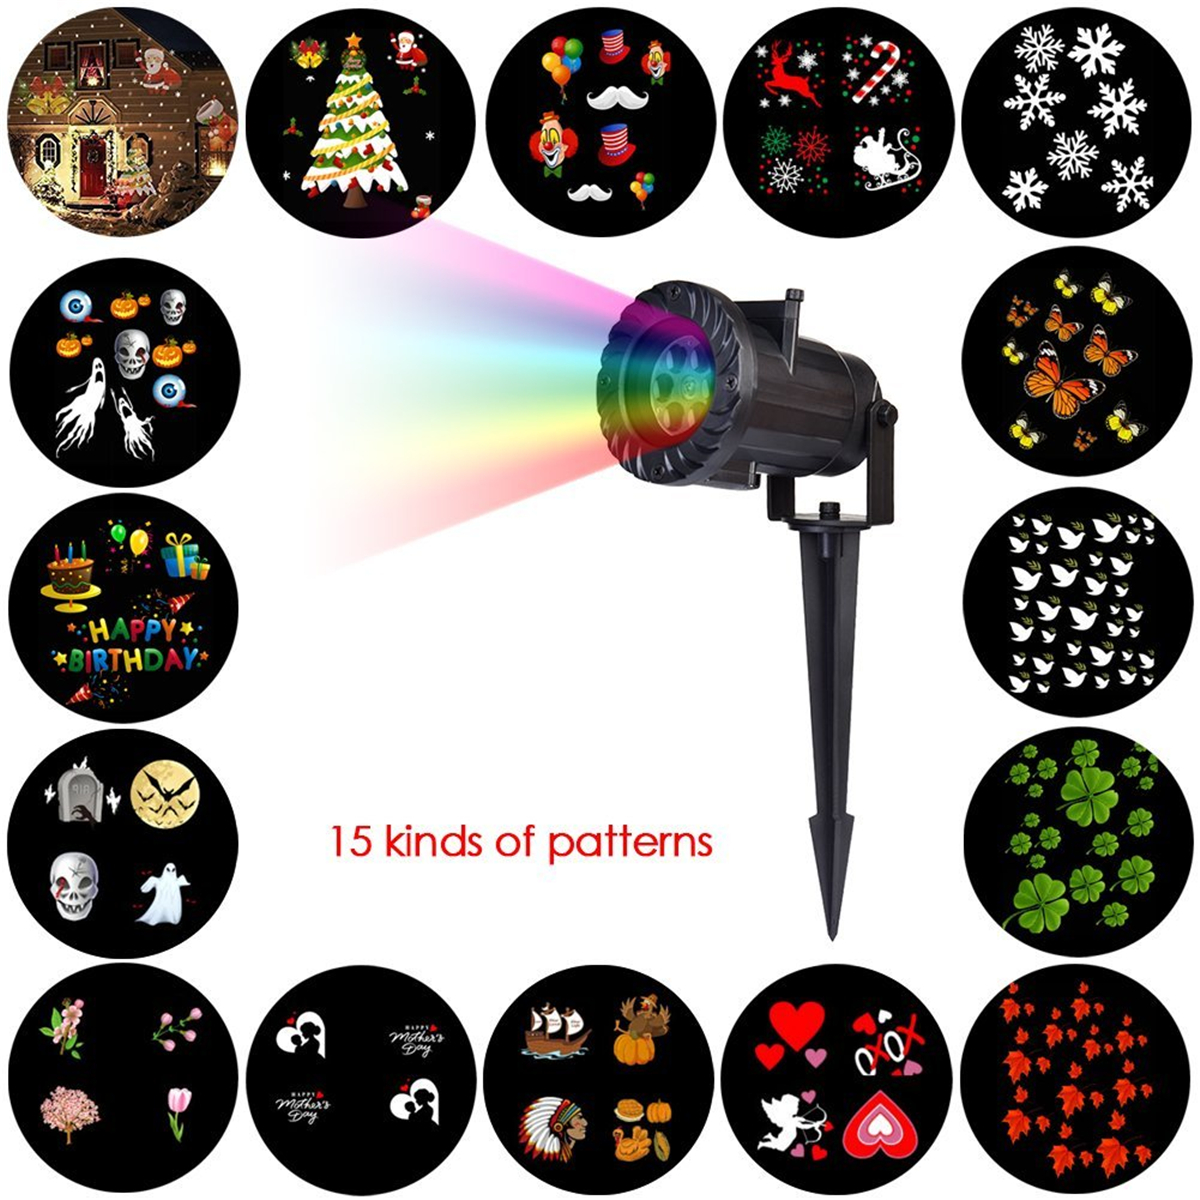 15-Patterns-LED-Projector-Stage-Light-Party-KTV-DJ-Disco-with-Remote-1231046-1